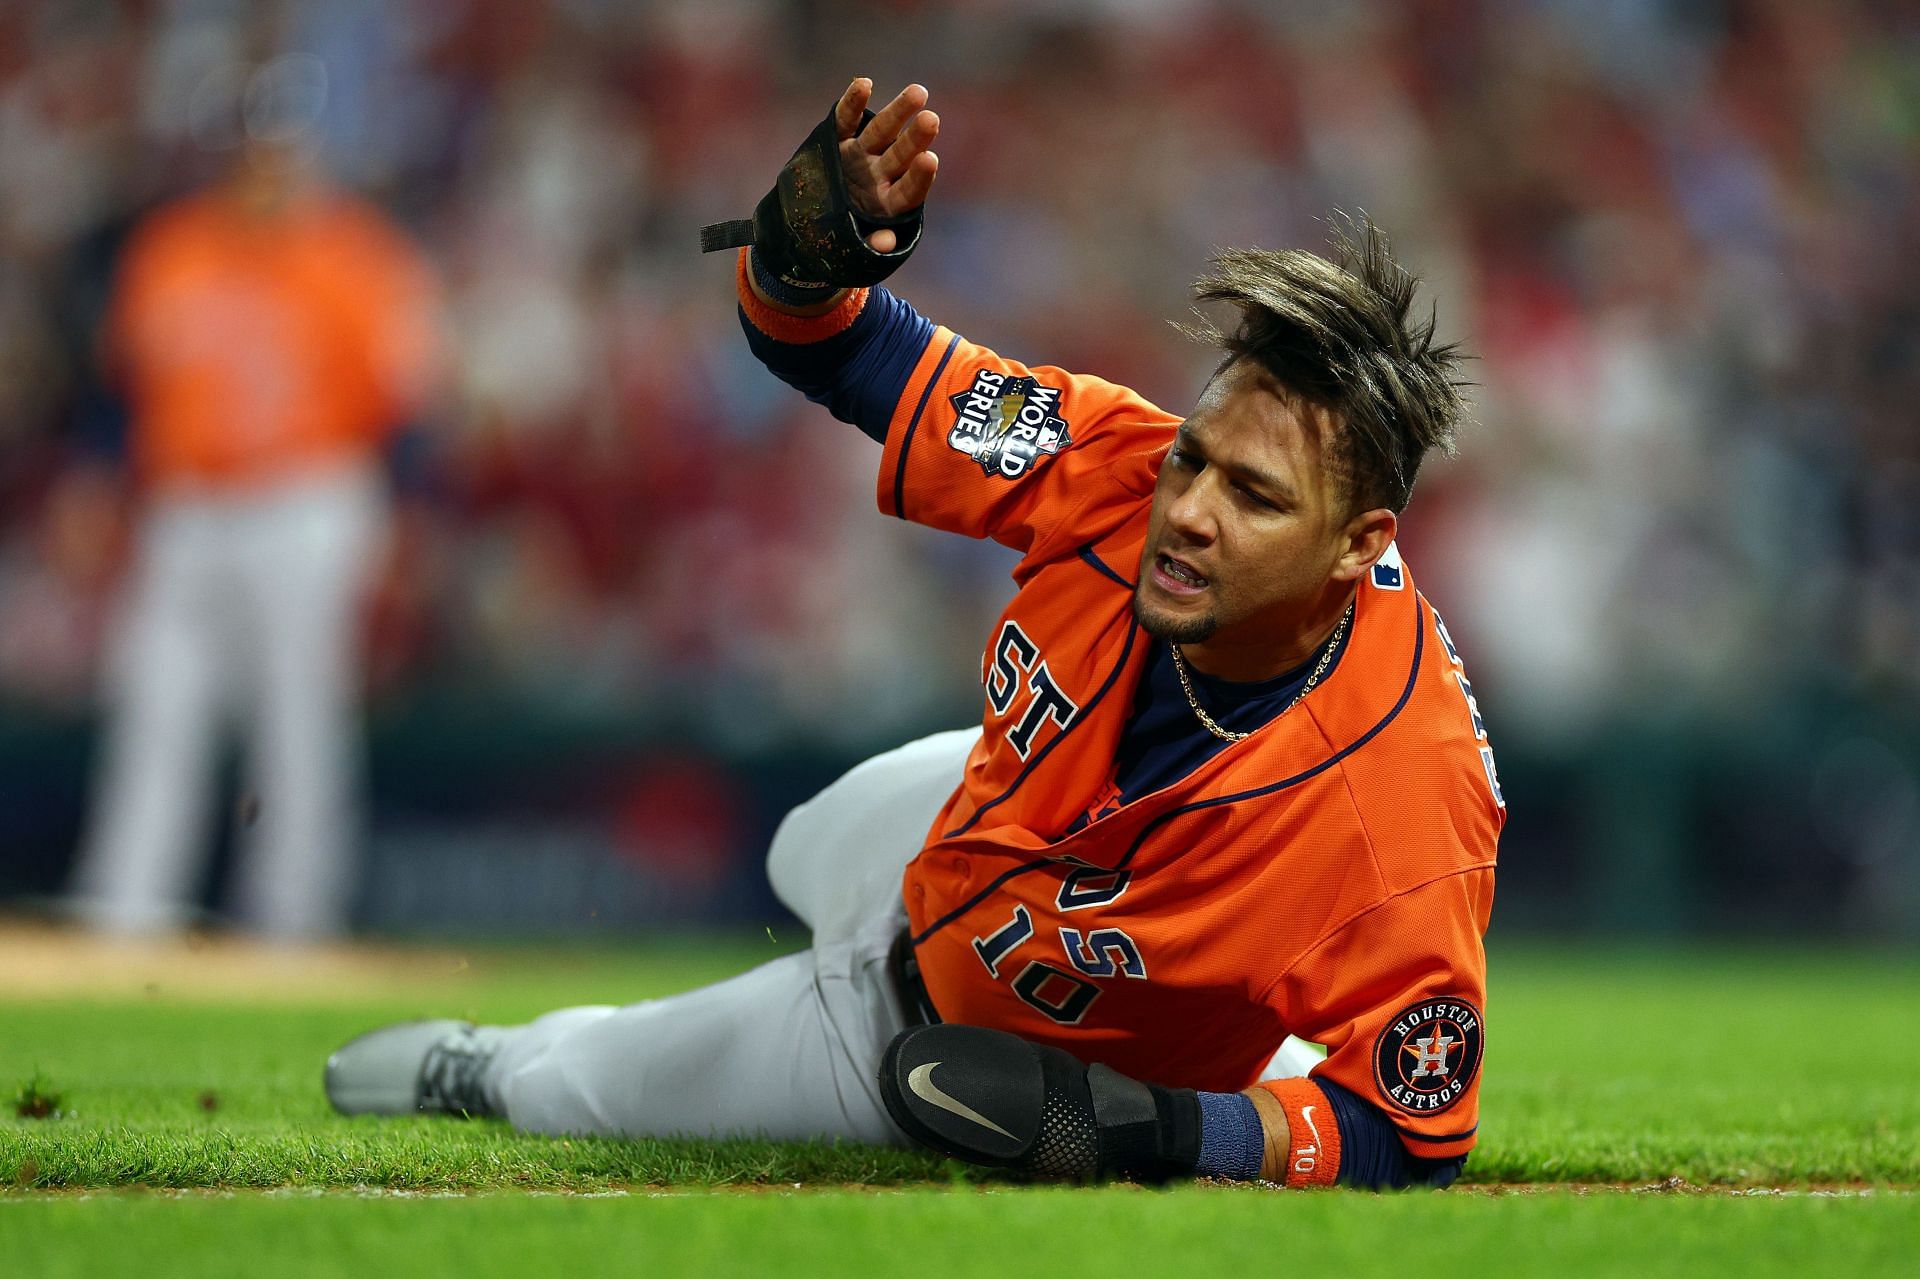 Yuli Gurriel is still being courted by Miami Marlins, reports MLB